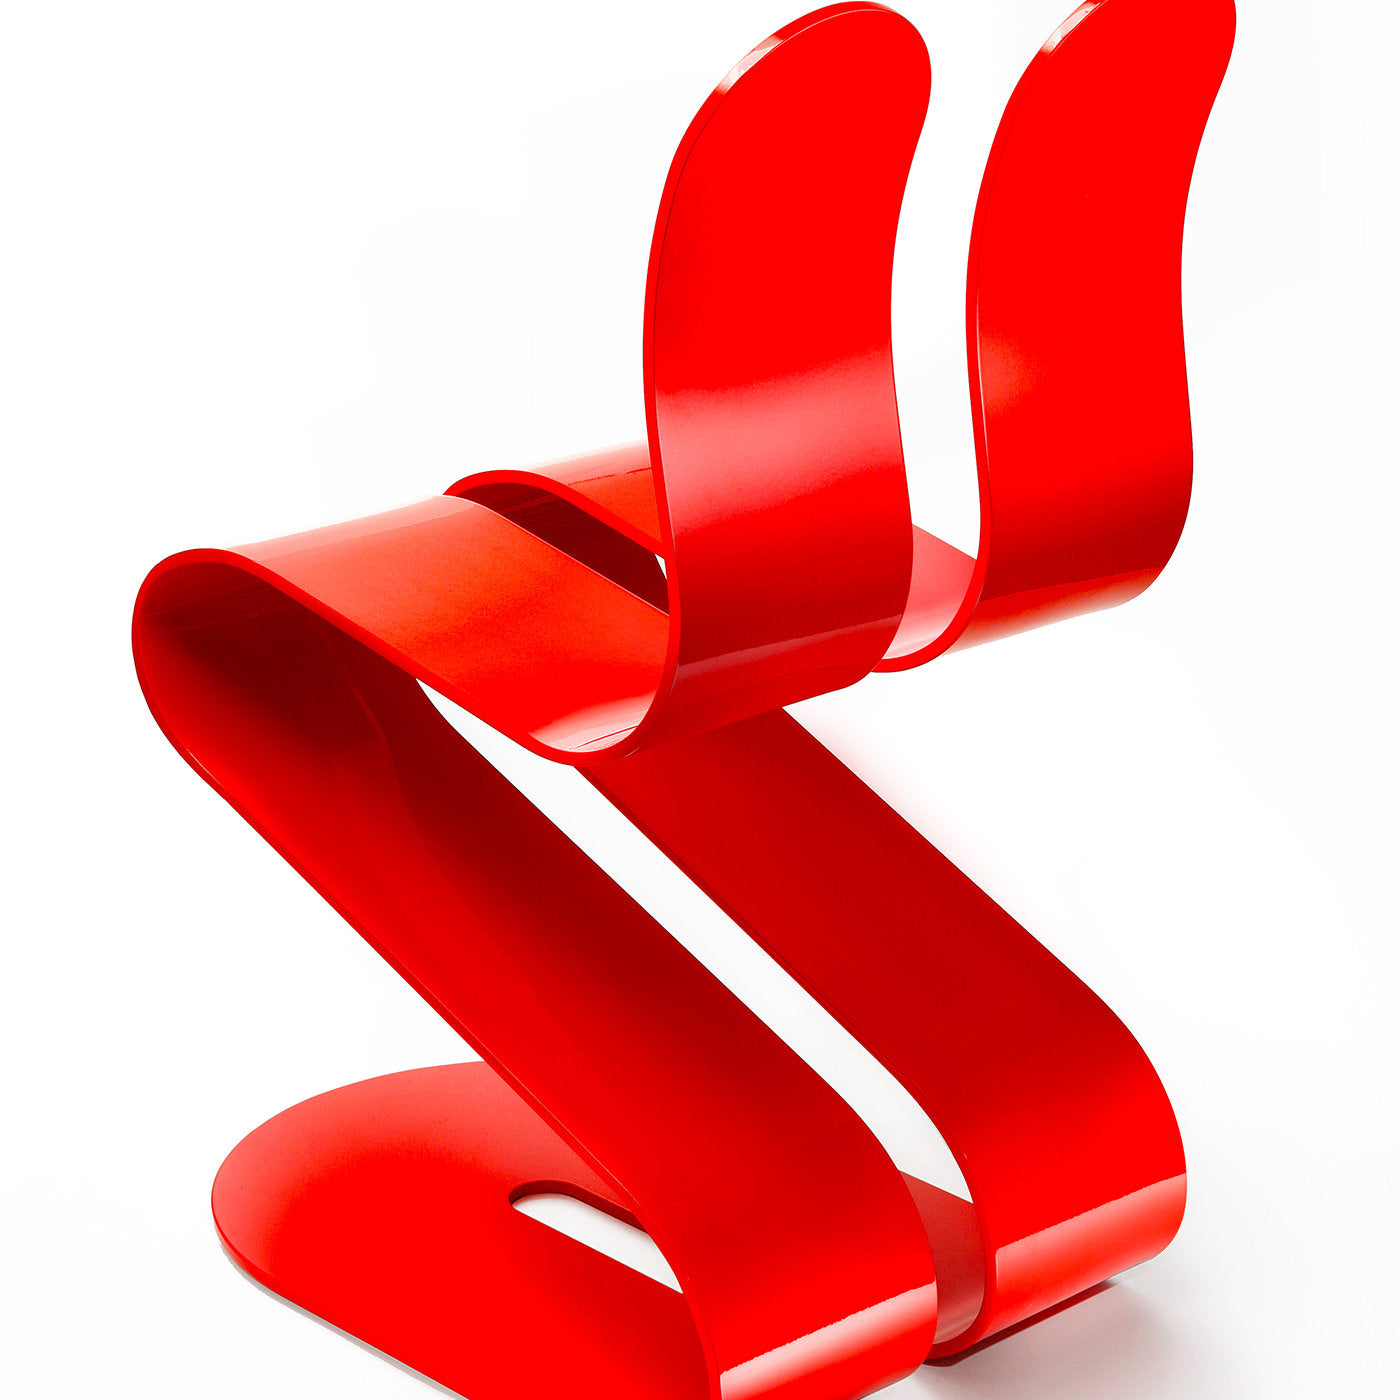 Fluid Ribbon Red Chair by Michael D'Amato - Alternative view 1